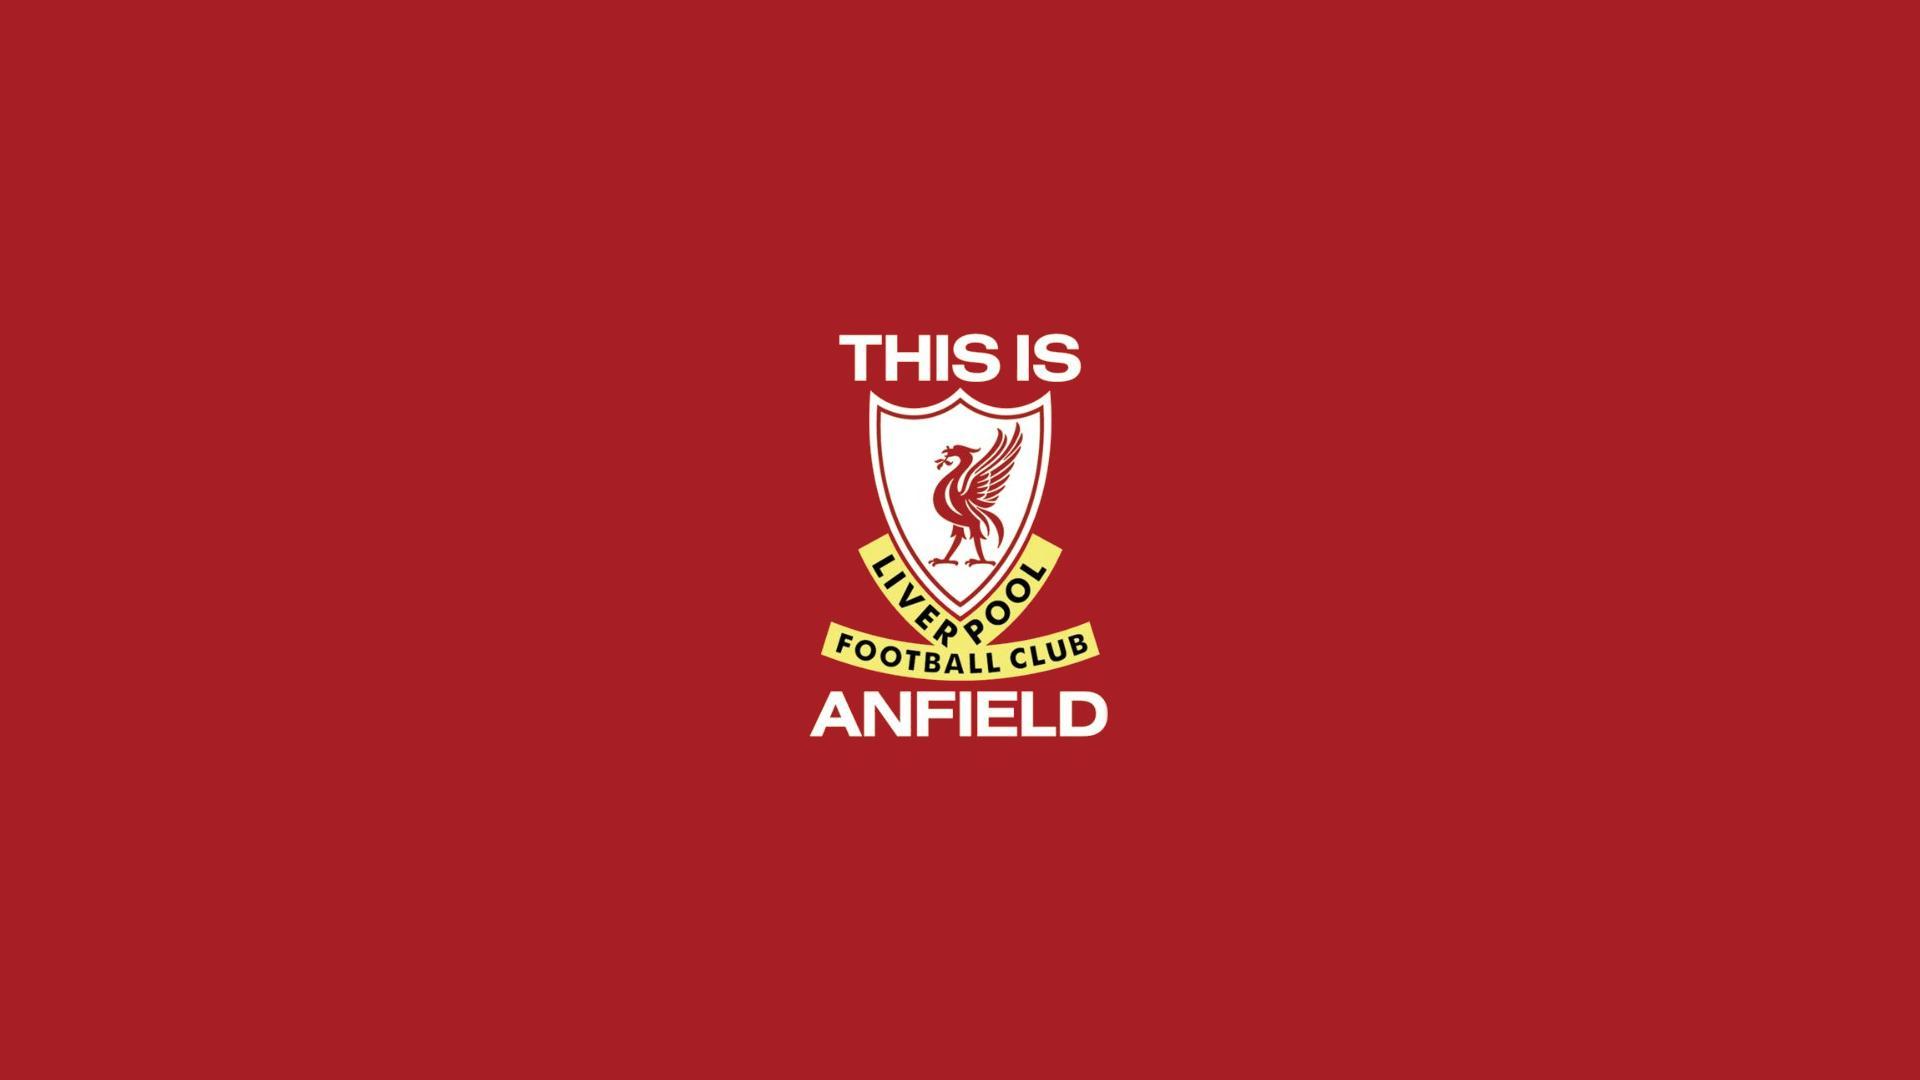 This Is Anfield Wallpapers Top Free This Is Anfield Backgrounds Wallpaperaccess